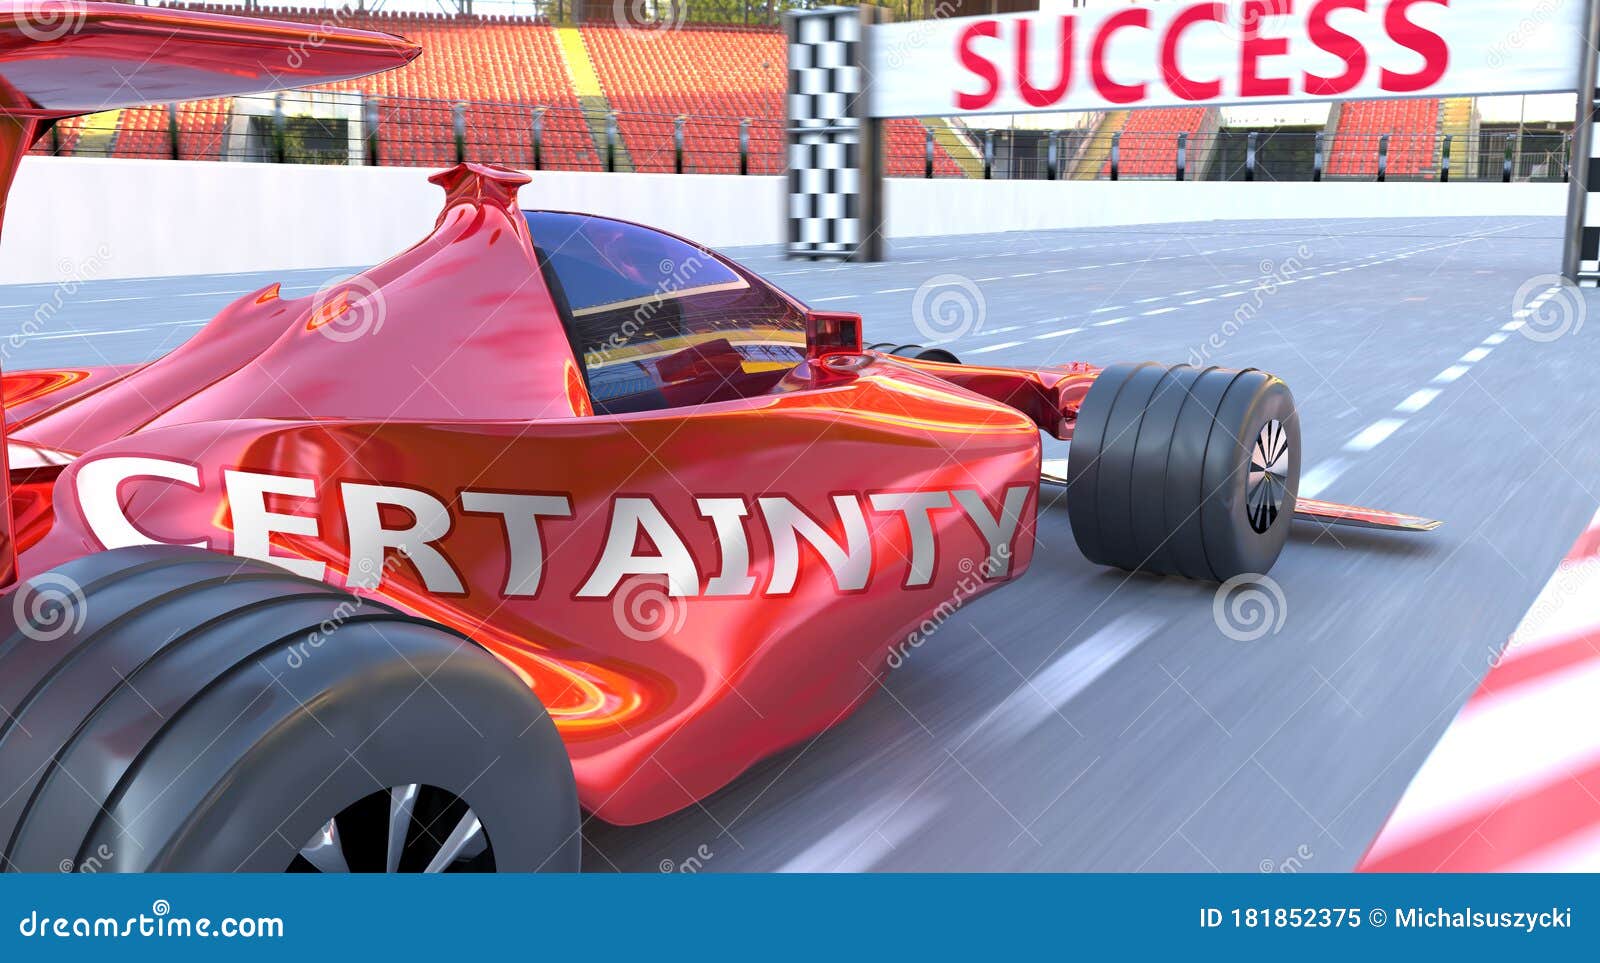 certainty and success - pictured as word certainty and a f1 car, to ize that certainty can help achieving success and